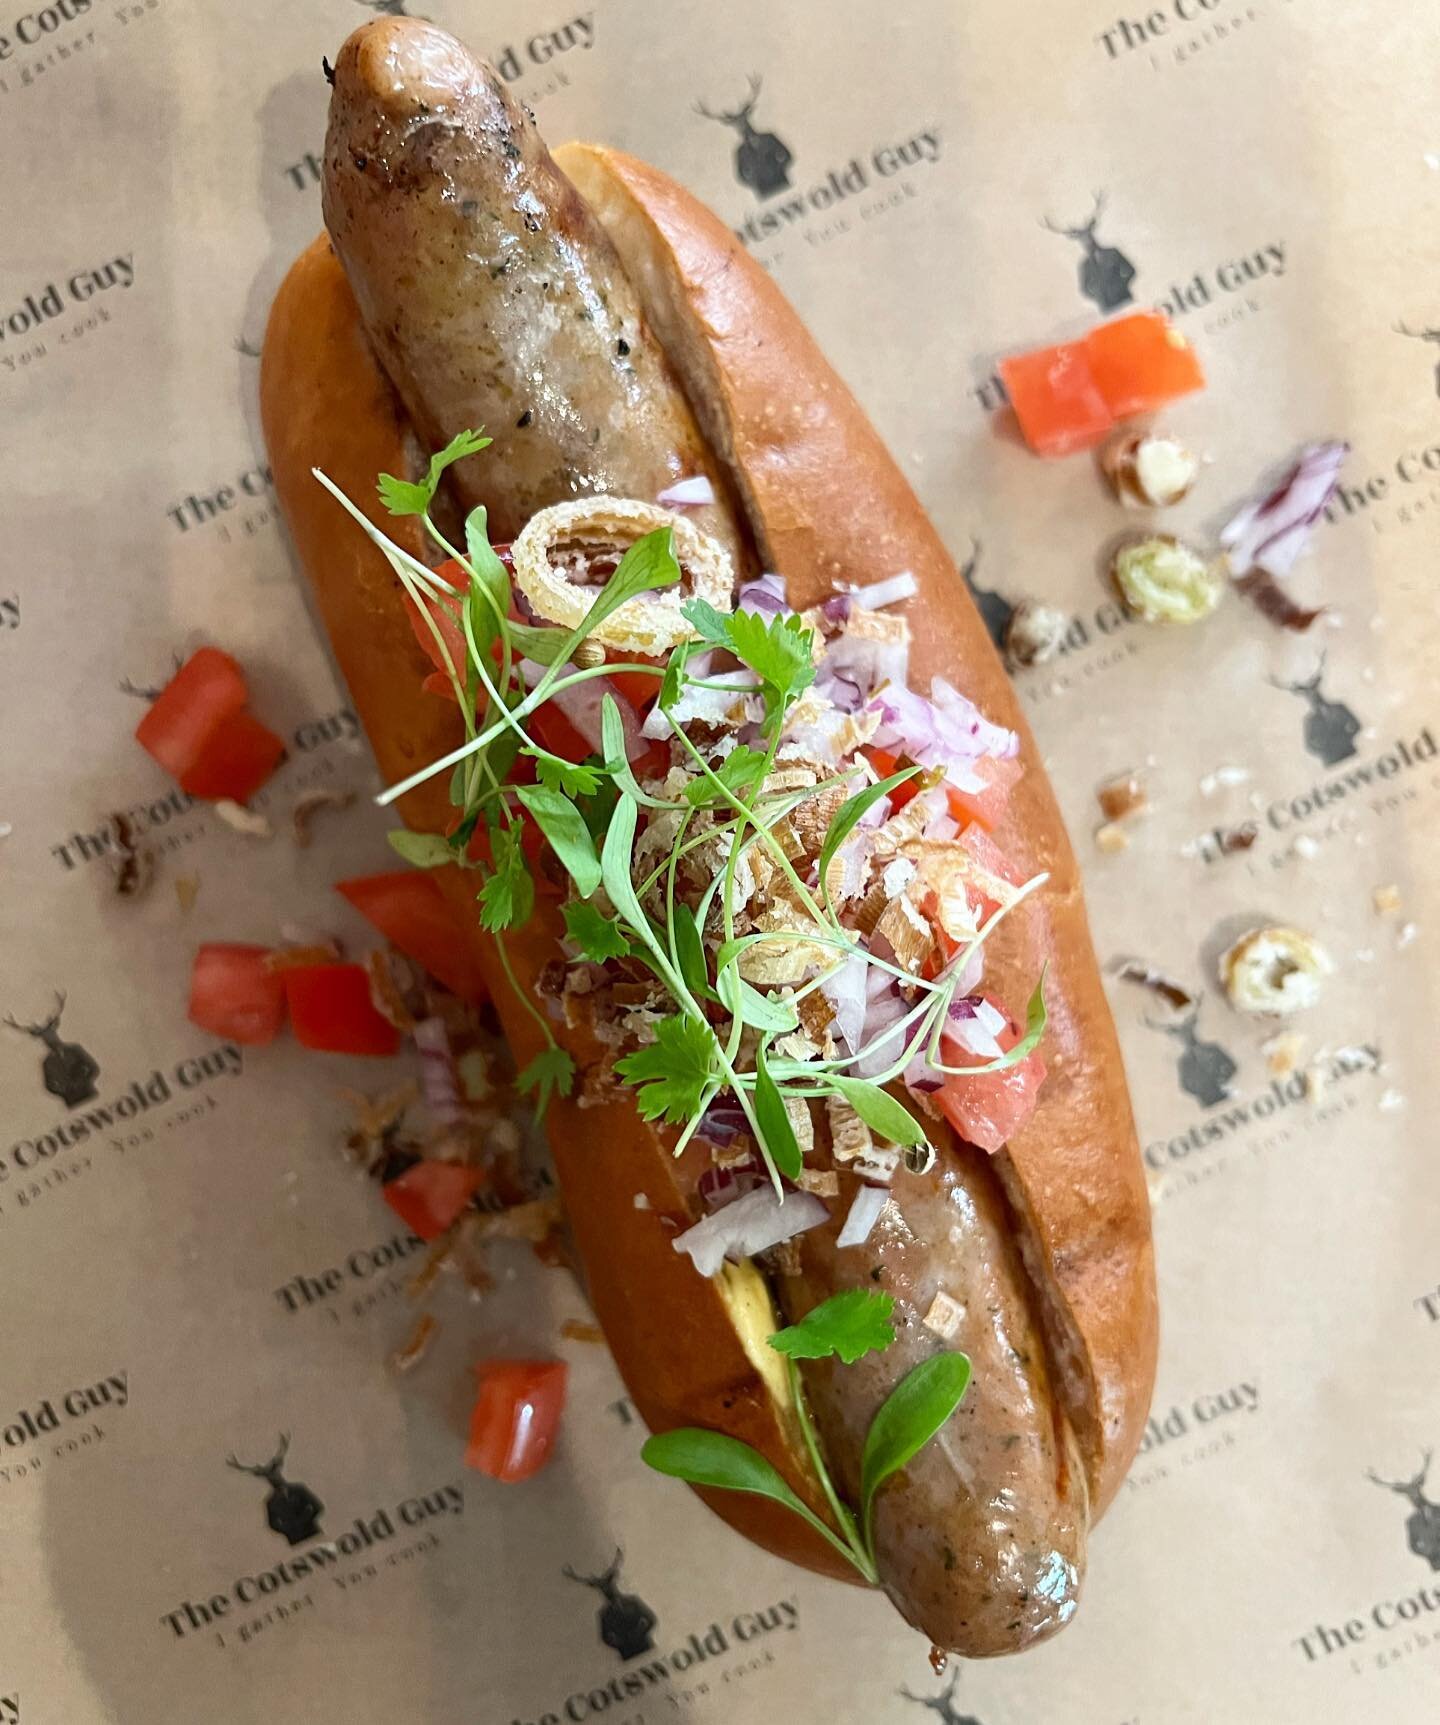 TCG hot dog now on the menu&hellip; 🔥 TCG sausage made with our secret recipe and @adamhenson_ pork, beautiful brioche from @otis_and_belle, chipotle mayo, fresh relish, crispy leeks &amp; then choose your favourite sauce or mustard&hellip; Only ava